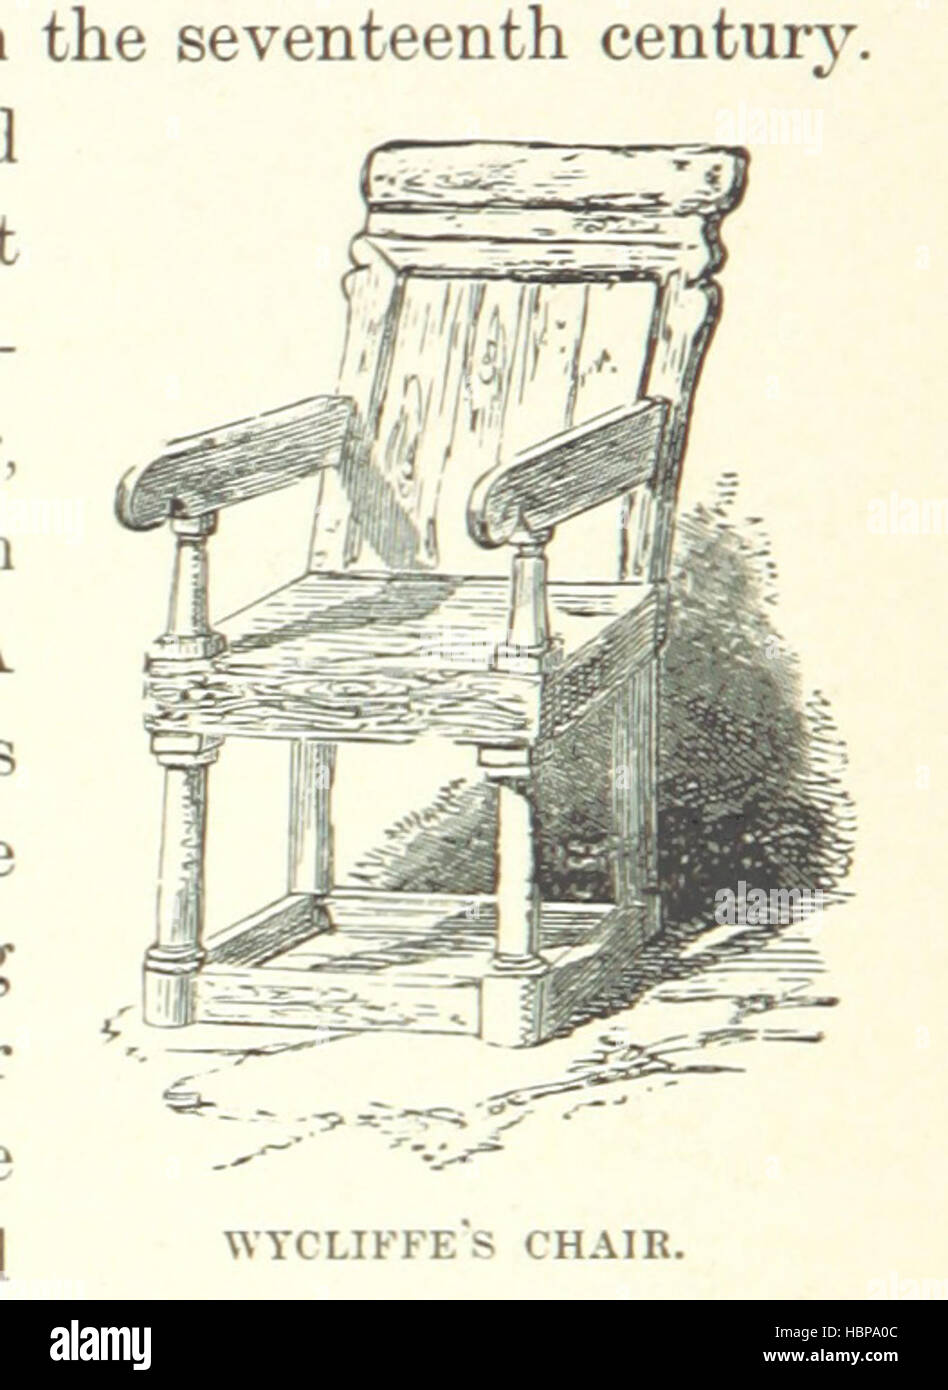 Image taken from page 242 of 'Wonderland, or, Curiosities of Nature and Art' Image taken from page 242 of 'Wonderland, or, Curiosities of Stock Photo